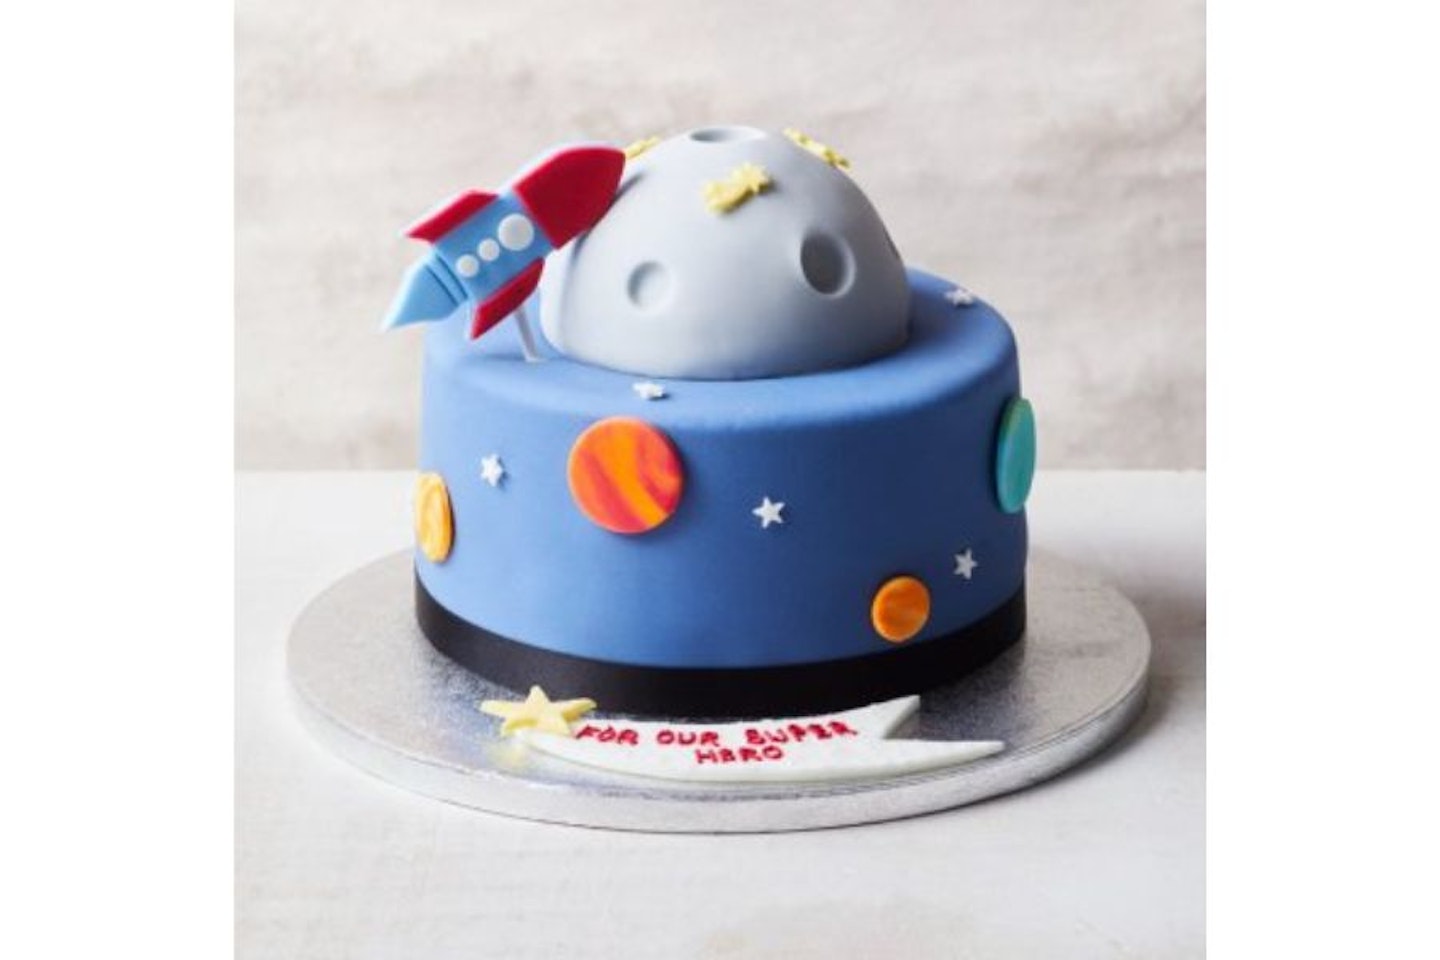 Space party ideas - Waitrose Space Galaxy Cake